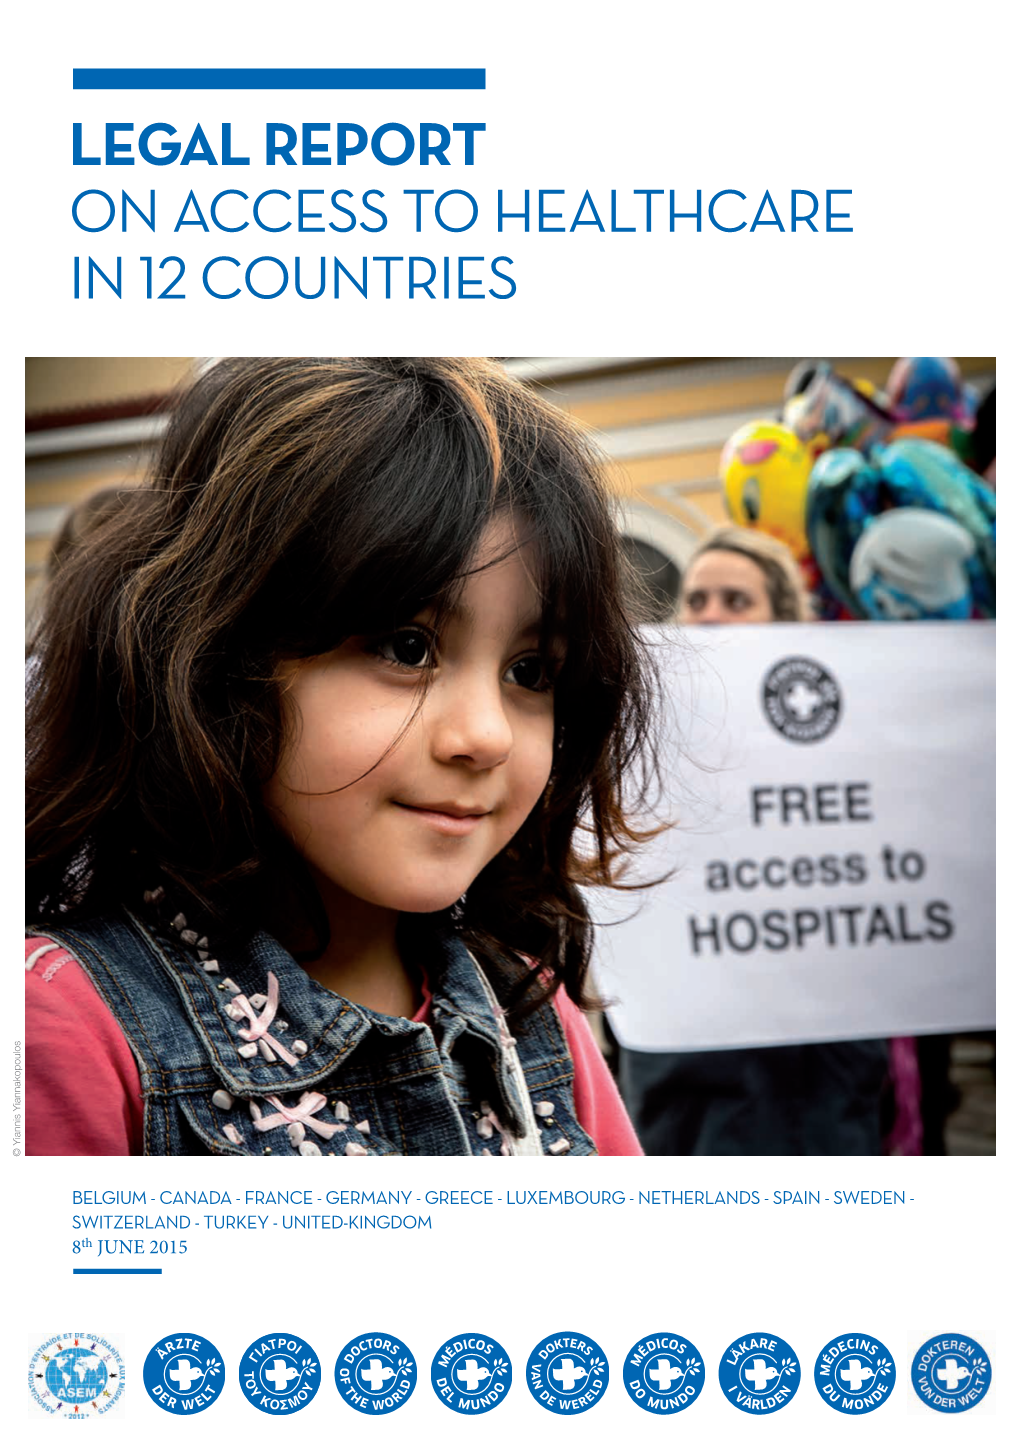 LEGAL REPORT on ACCESS to HEALTHCARE in 12 COUNTRIES © Yiannis Yiannakopoulos © Yiannis